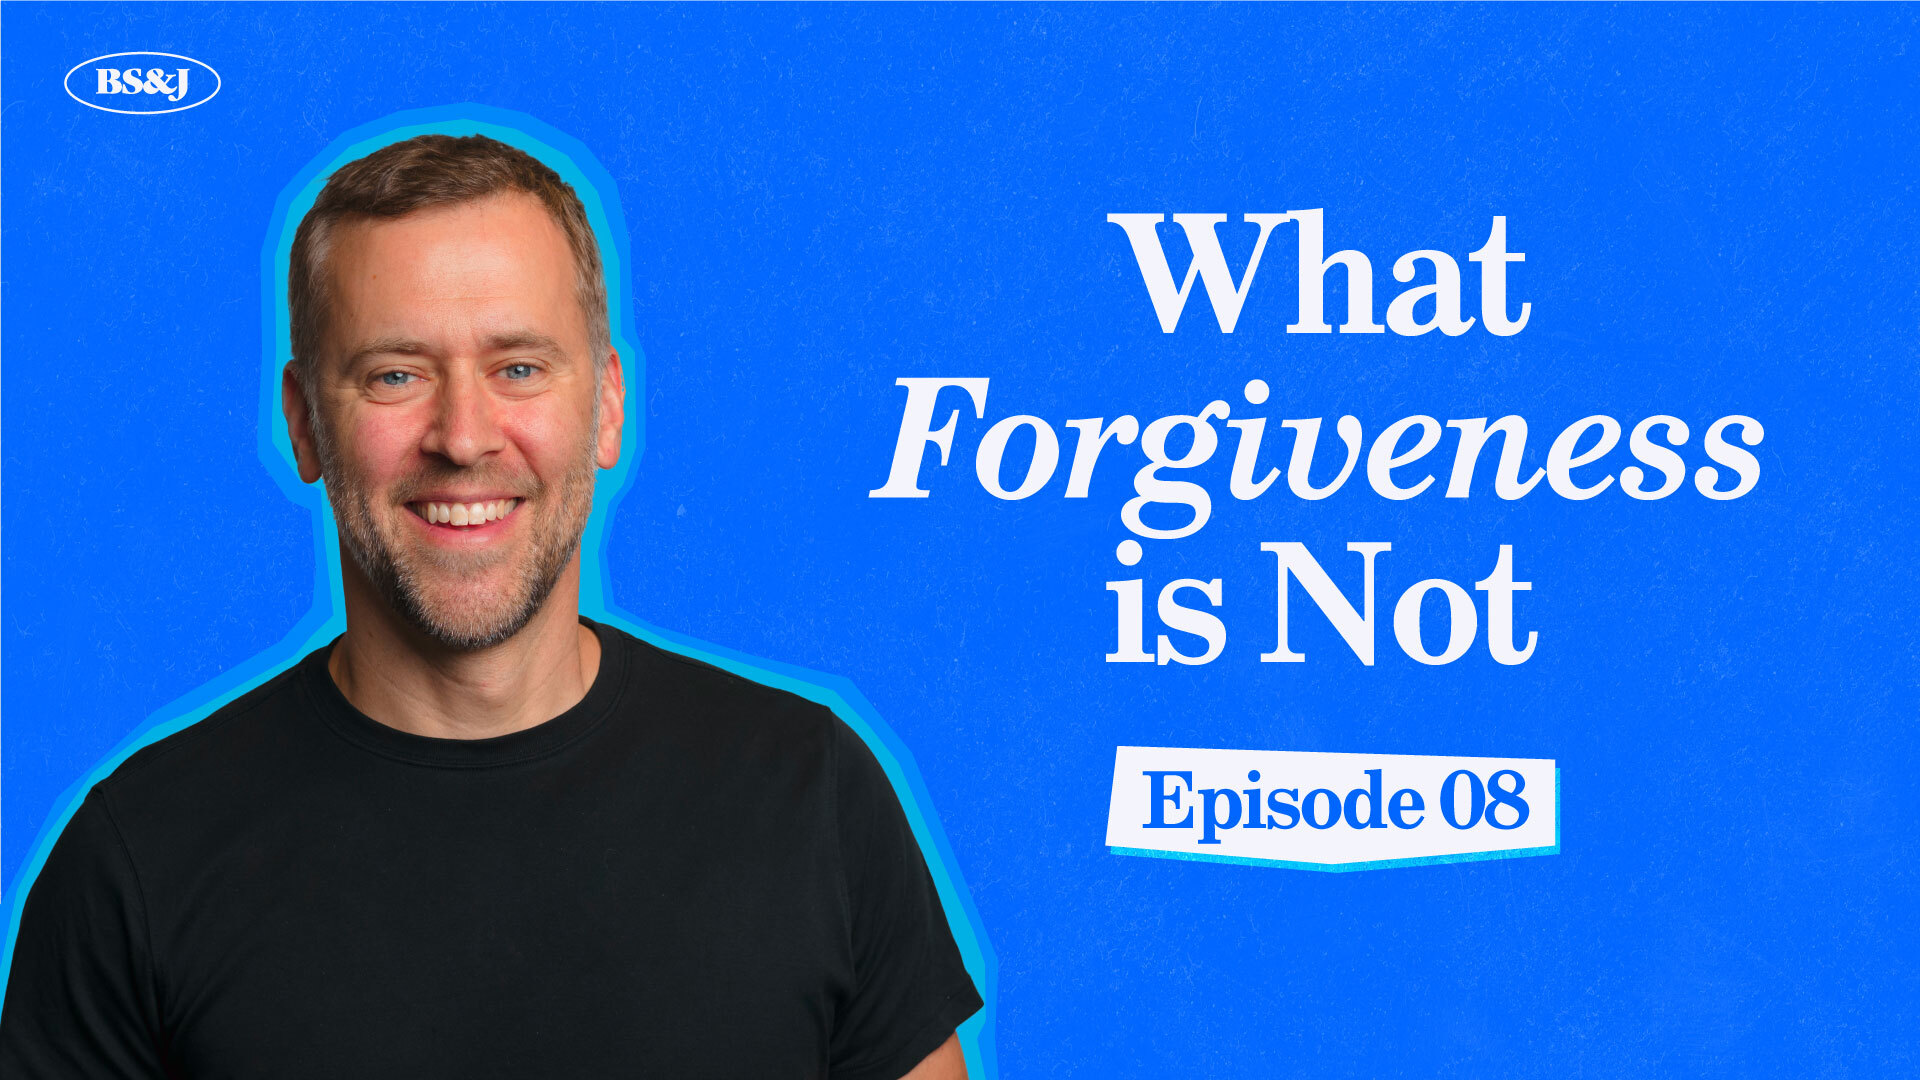 Episode 8 – What Forgiveness is NOT